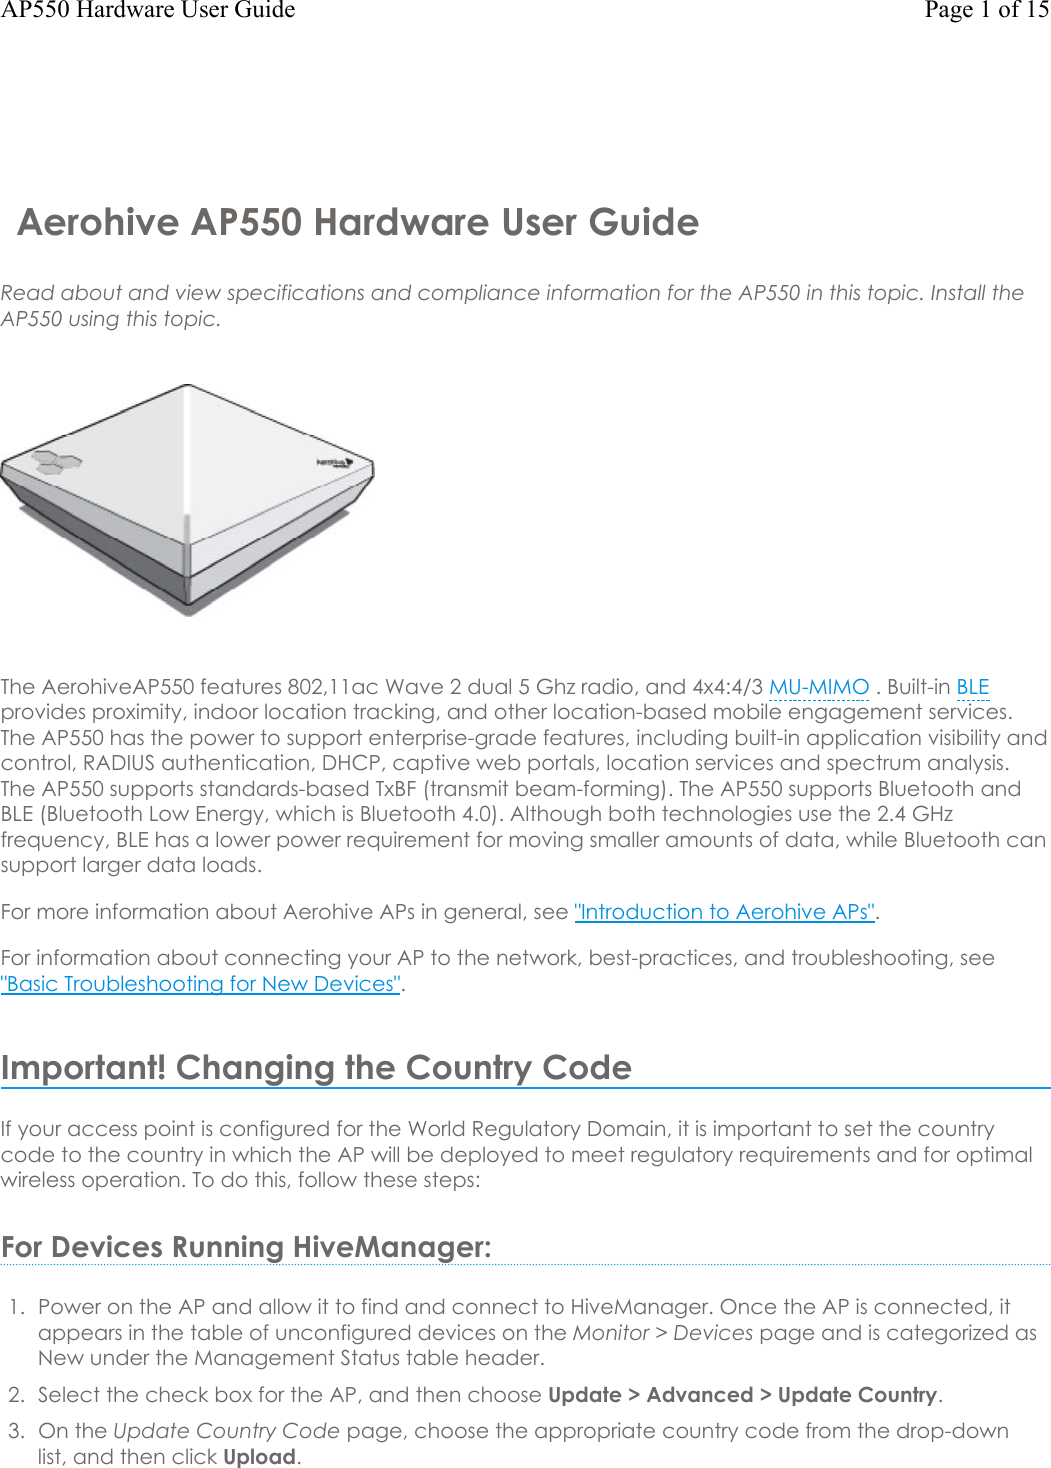 Aerohive AP550 Hardware User GuideRead about and view specifications and compliance information for the AP550 in this topic. Install the AP550 using this topic.The AerohiveAP550 features 802,11ac Wave 2 dual 5 Ghz radio, and 4x4:4/3 MU-MIMO . Built-in BLEprovides proximity, indoor location tracking, and other location-based mobile engagement services. The AP550 has the power to support enterprise-grade features, including built-in application visibility and control, RADIUS authentication, DHCP, captive web portals, location services and spectrum analysis. The AP550 supports standards-based TxBF (transmit beam-forming). The AP550 supports Bluetooth and BLE (Bluetooth Low Energy, which is Bluetooth 4.0). Although both technologies use the 2.4 GHz frequency, BLE has a lower power requirement for moving smaller amounts of data, while Bluetooth can support larger data loads. For more information about Aerohive APs in general, see &quot;Introduction to Aerohive APs&quot;.For information about connecting your APto the network, best-practices, and troubleshooting, see &quot;Basic Troubleshooting for New Devices&quot;.Important! Changing the Country CodeIf your access point is configured for the World Regulatory Domain, it is important to set the country code to the country in which the APwill be deployed to meet regulatory requirements and for optimal wireless operation. To do this, follow these steps:For Devices Running HiveManager:1. Power on the APand allow it to find and connect to HiveManager. Once the APisconnected, itappears in the table of unconfigured devices on the Monitor &gt; Devices page and is categorized asNew under the Management Status table header.2. Select the check box for the AP, and then choose Update &gt; Advanced &gt;Update Country.3. On the Update Country Code page, choose the appropriate country code from the drop-downlist, and then click Upload.Page 1 of 15AP550 Hardware User Guide